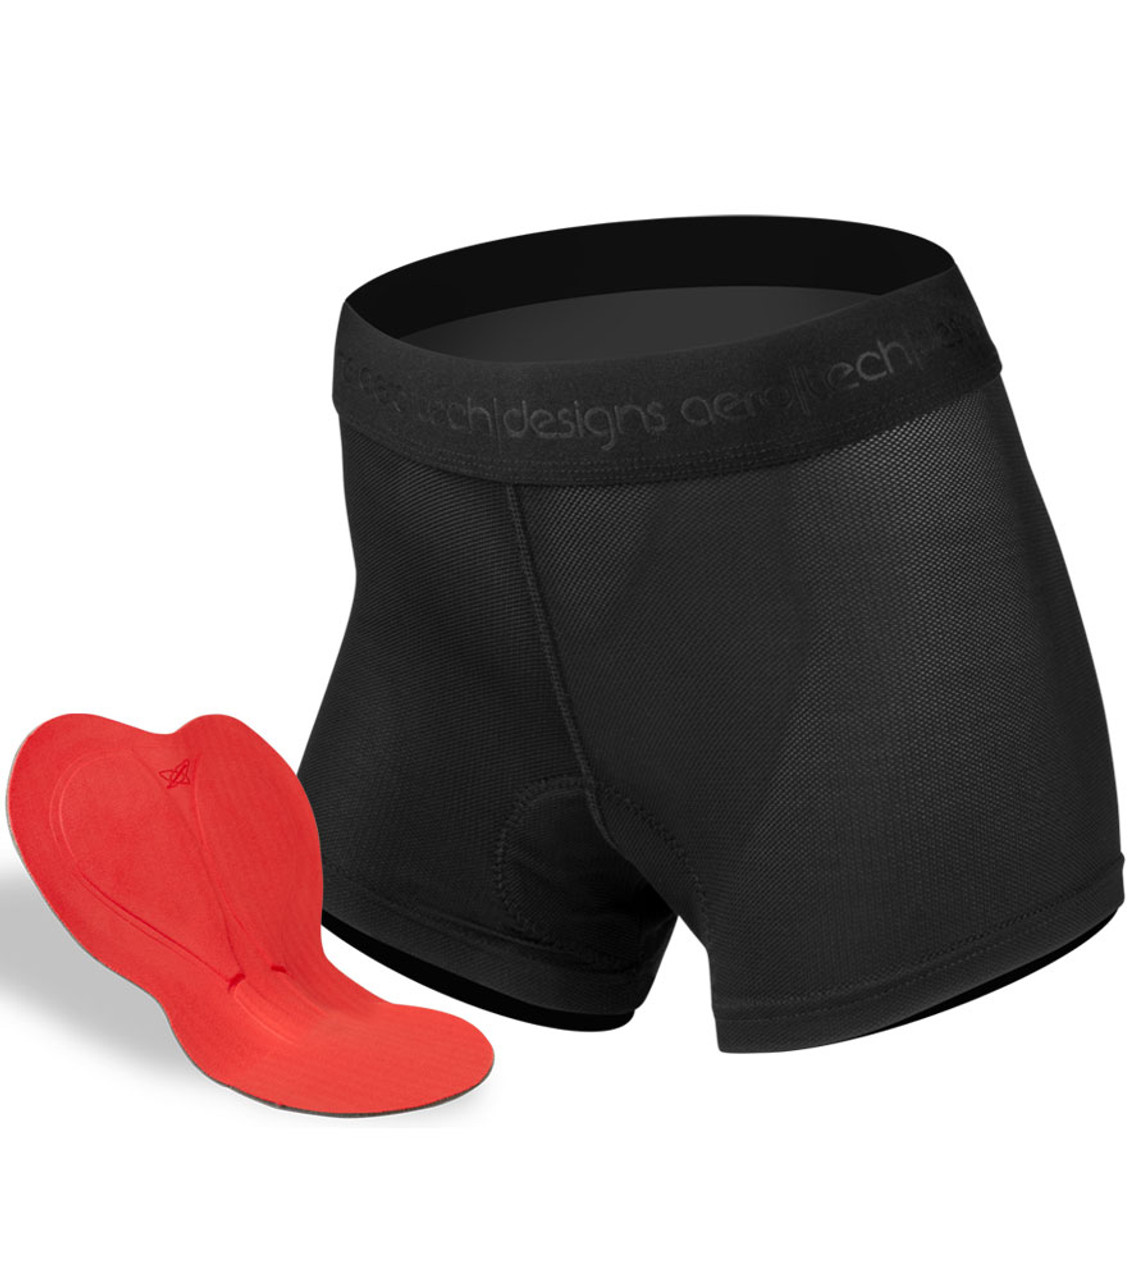 Cycling Under pants for Women